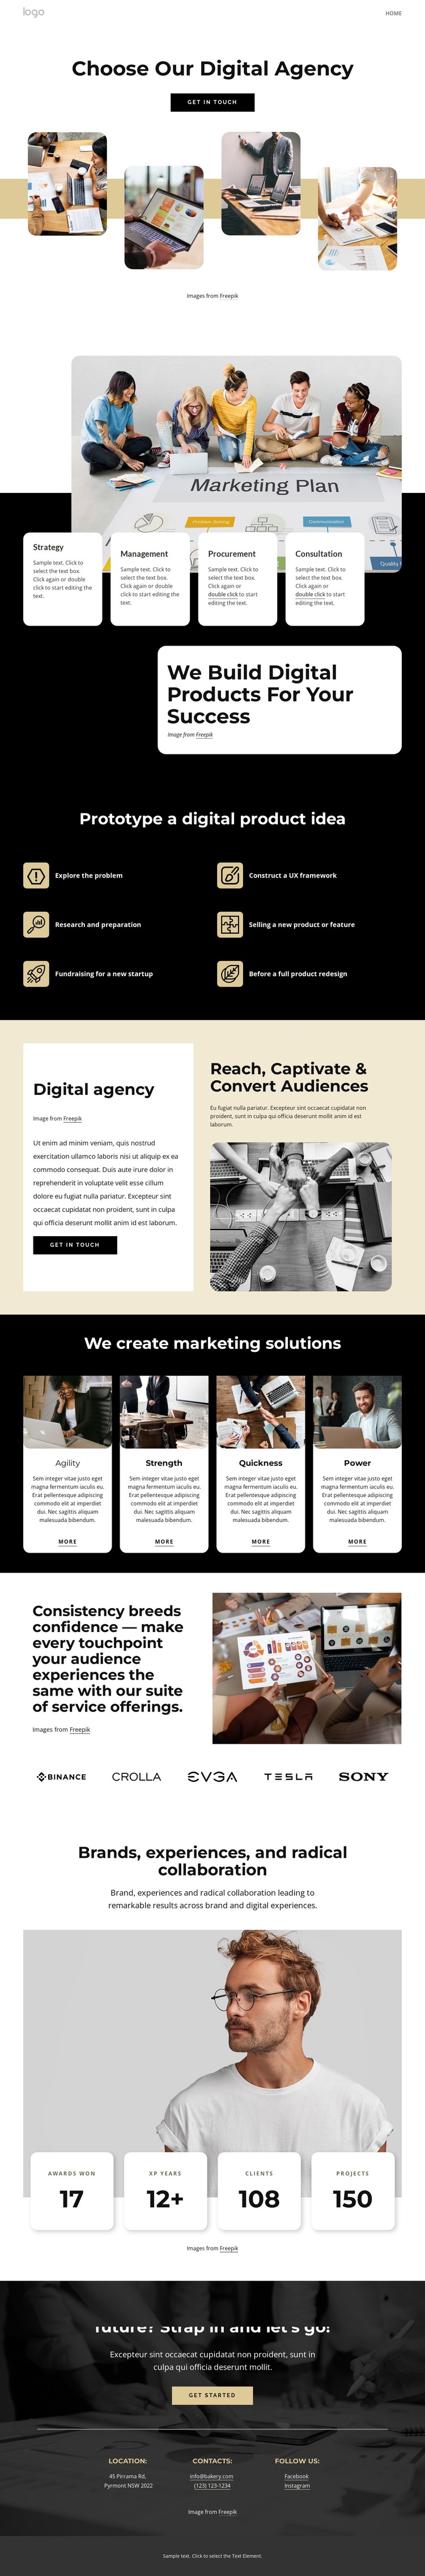 Choose our digital agency CSS Template